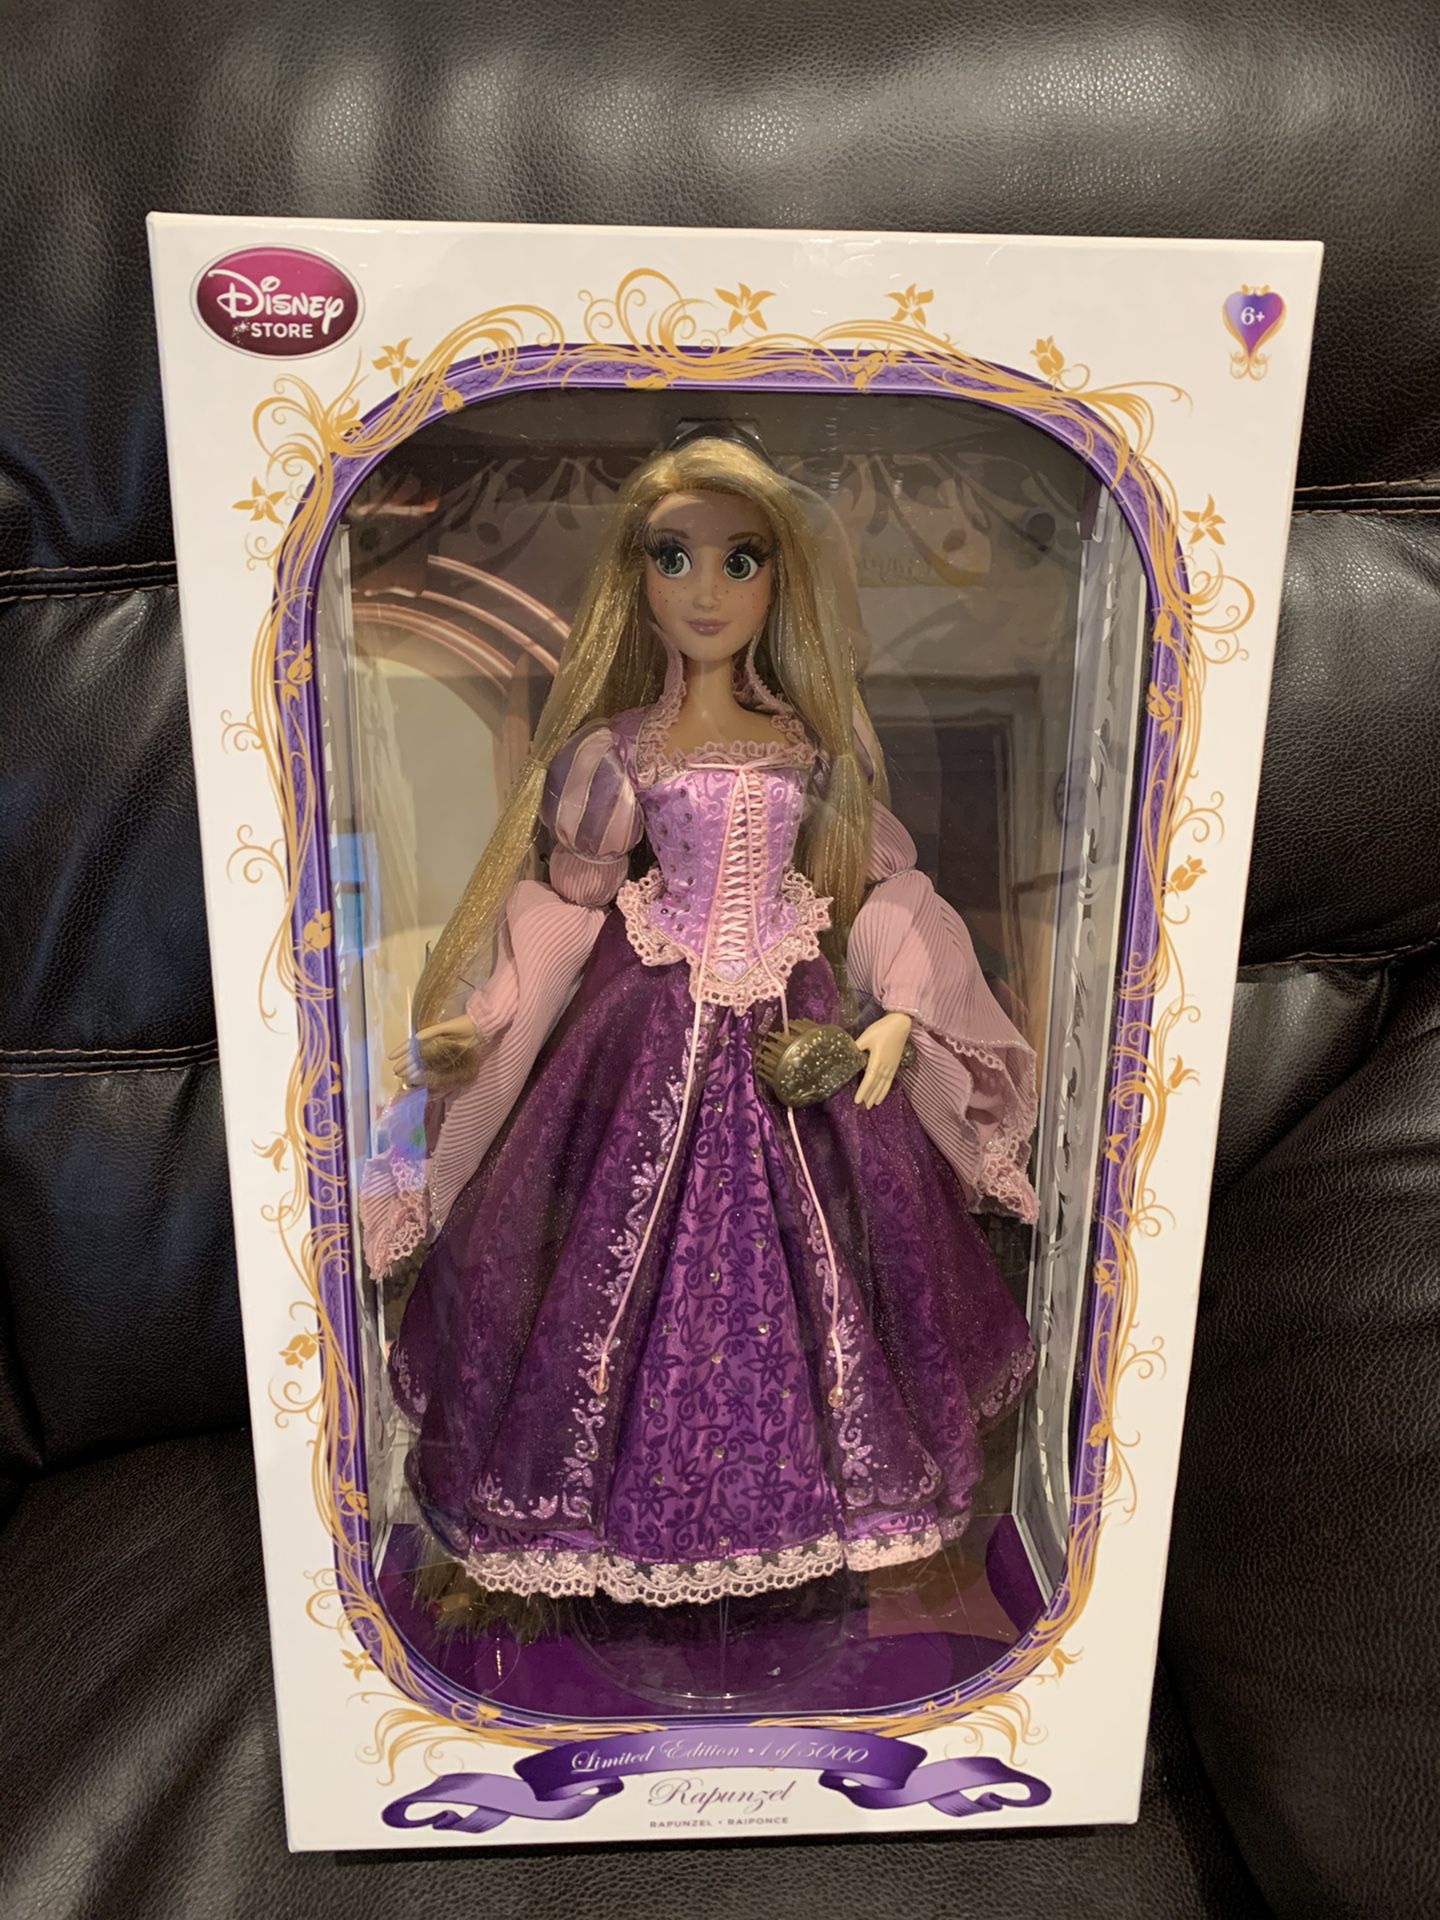 Disney Store Limited Edition Rapunzel Doll 17 inch-New in Box-1:5000